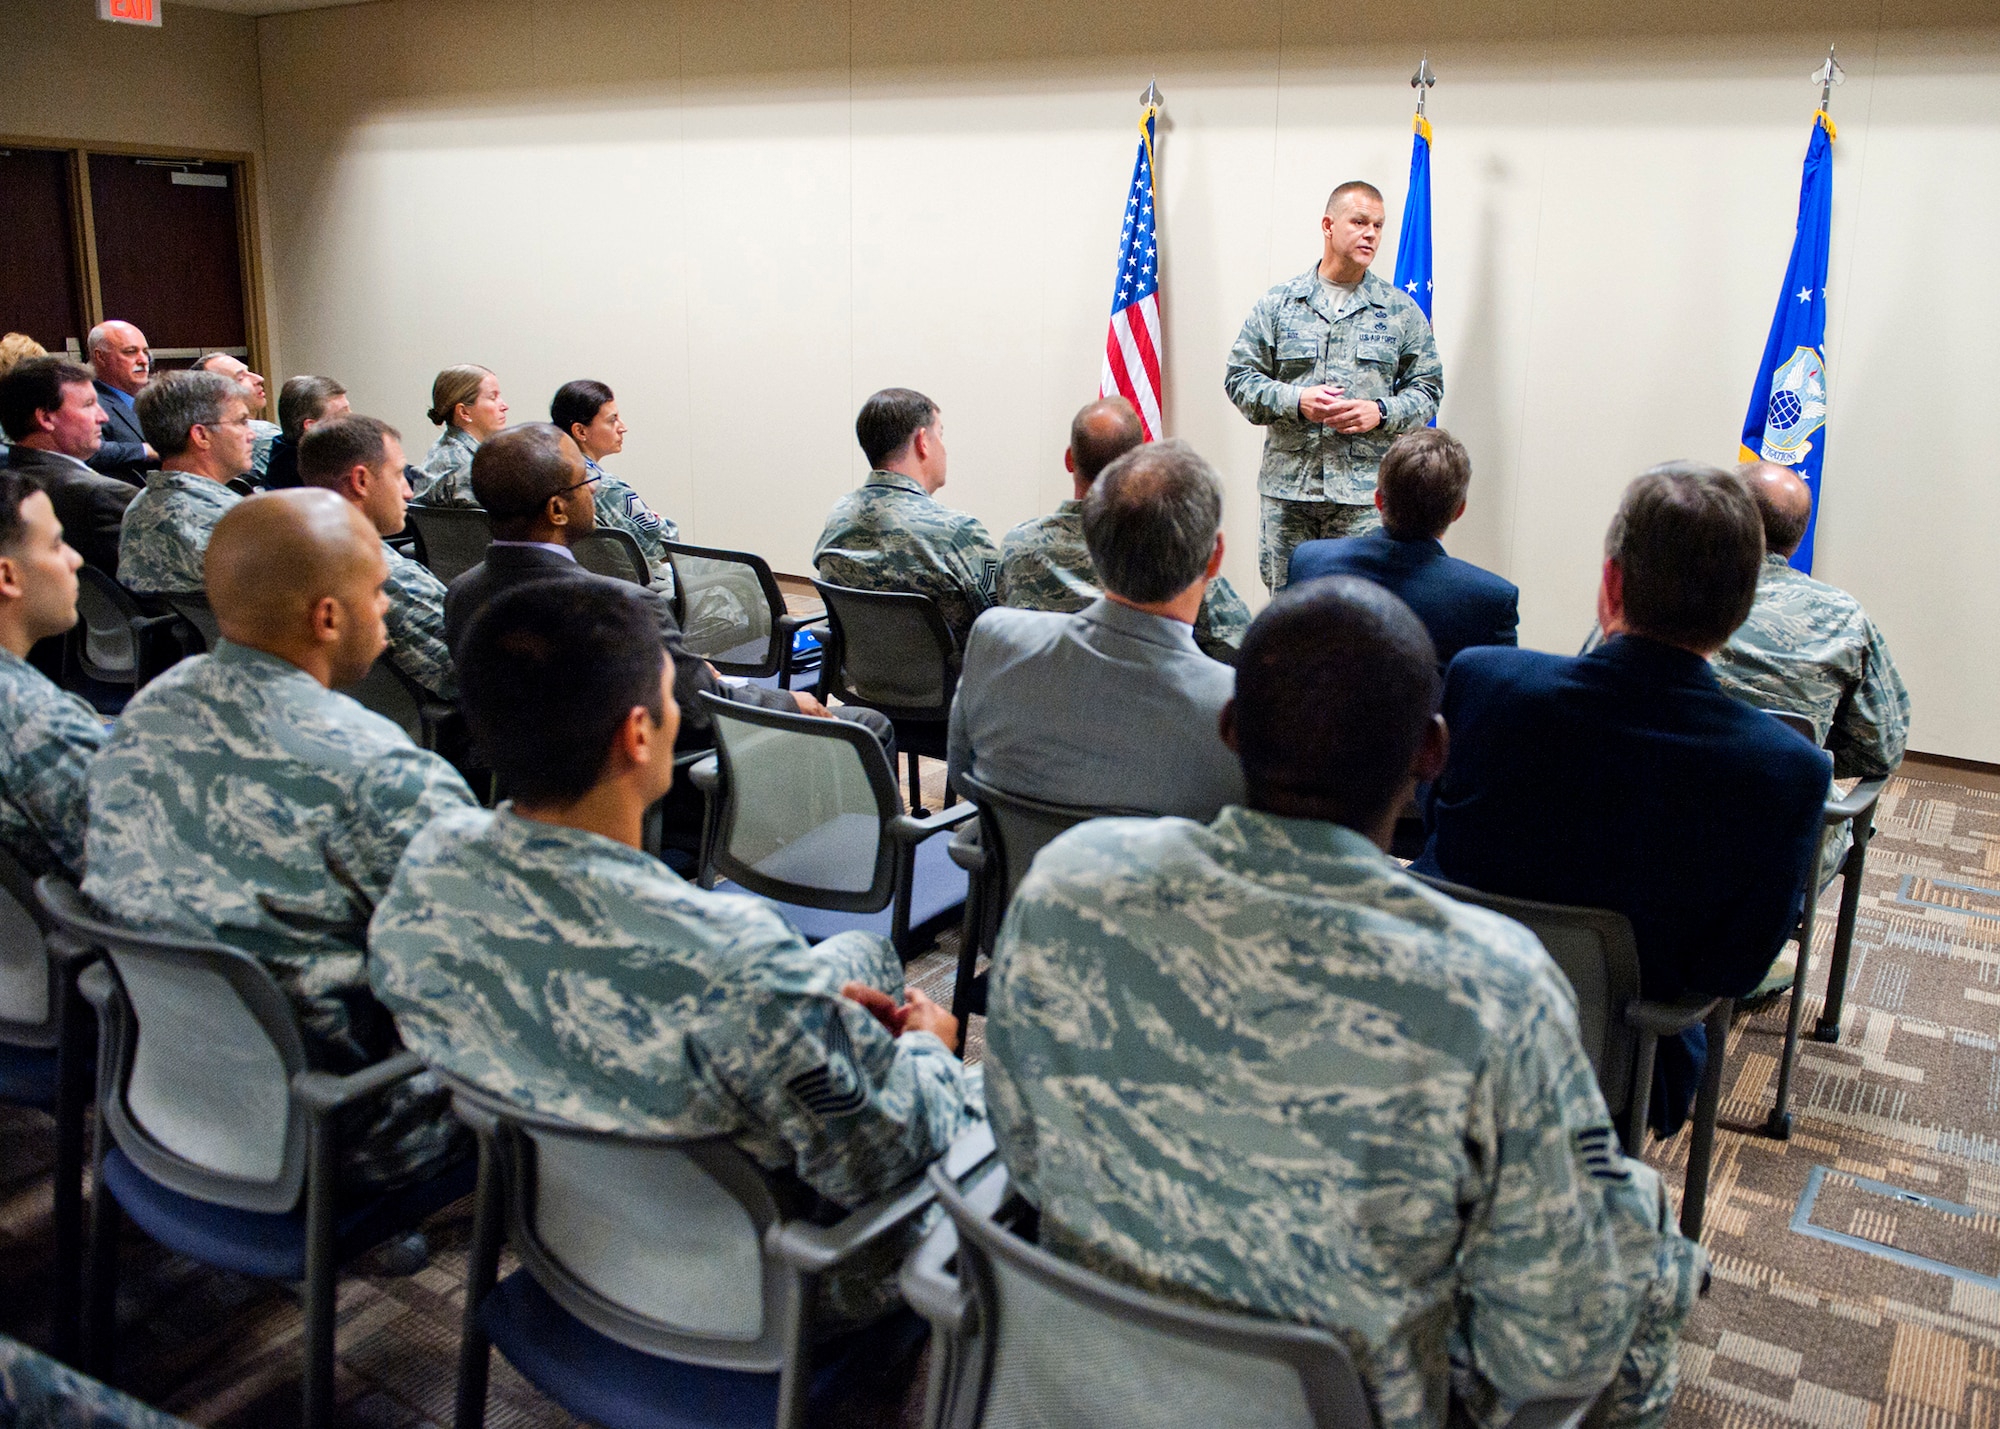 Chief Master Sergeant of the Air Force James A. Roy speaks to AFOSI civilians and military members during an "all-call" at the OSI headquarters. Chief Roy talked with the group about the growing importance of joint coalition operations in the Middle East; stressed the necessity of education, experience and training for proper development of both the enlisted and officer force; and finally encouraged strength and resiliency, especially in these difficult times. (U.S. Air Force Photo by Mr. Mike Hastings)